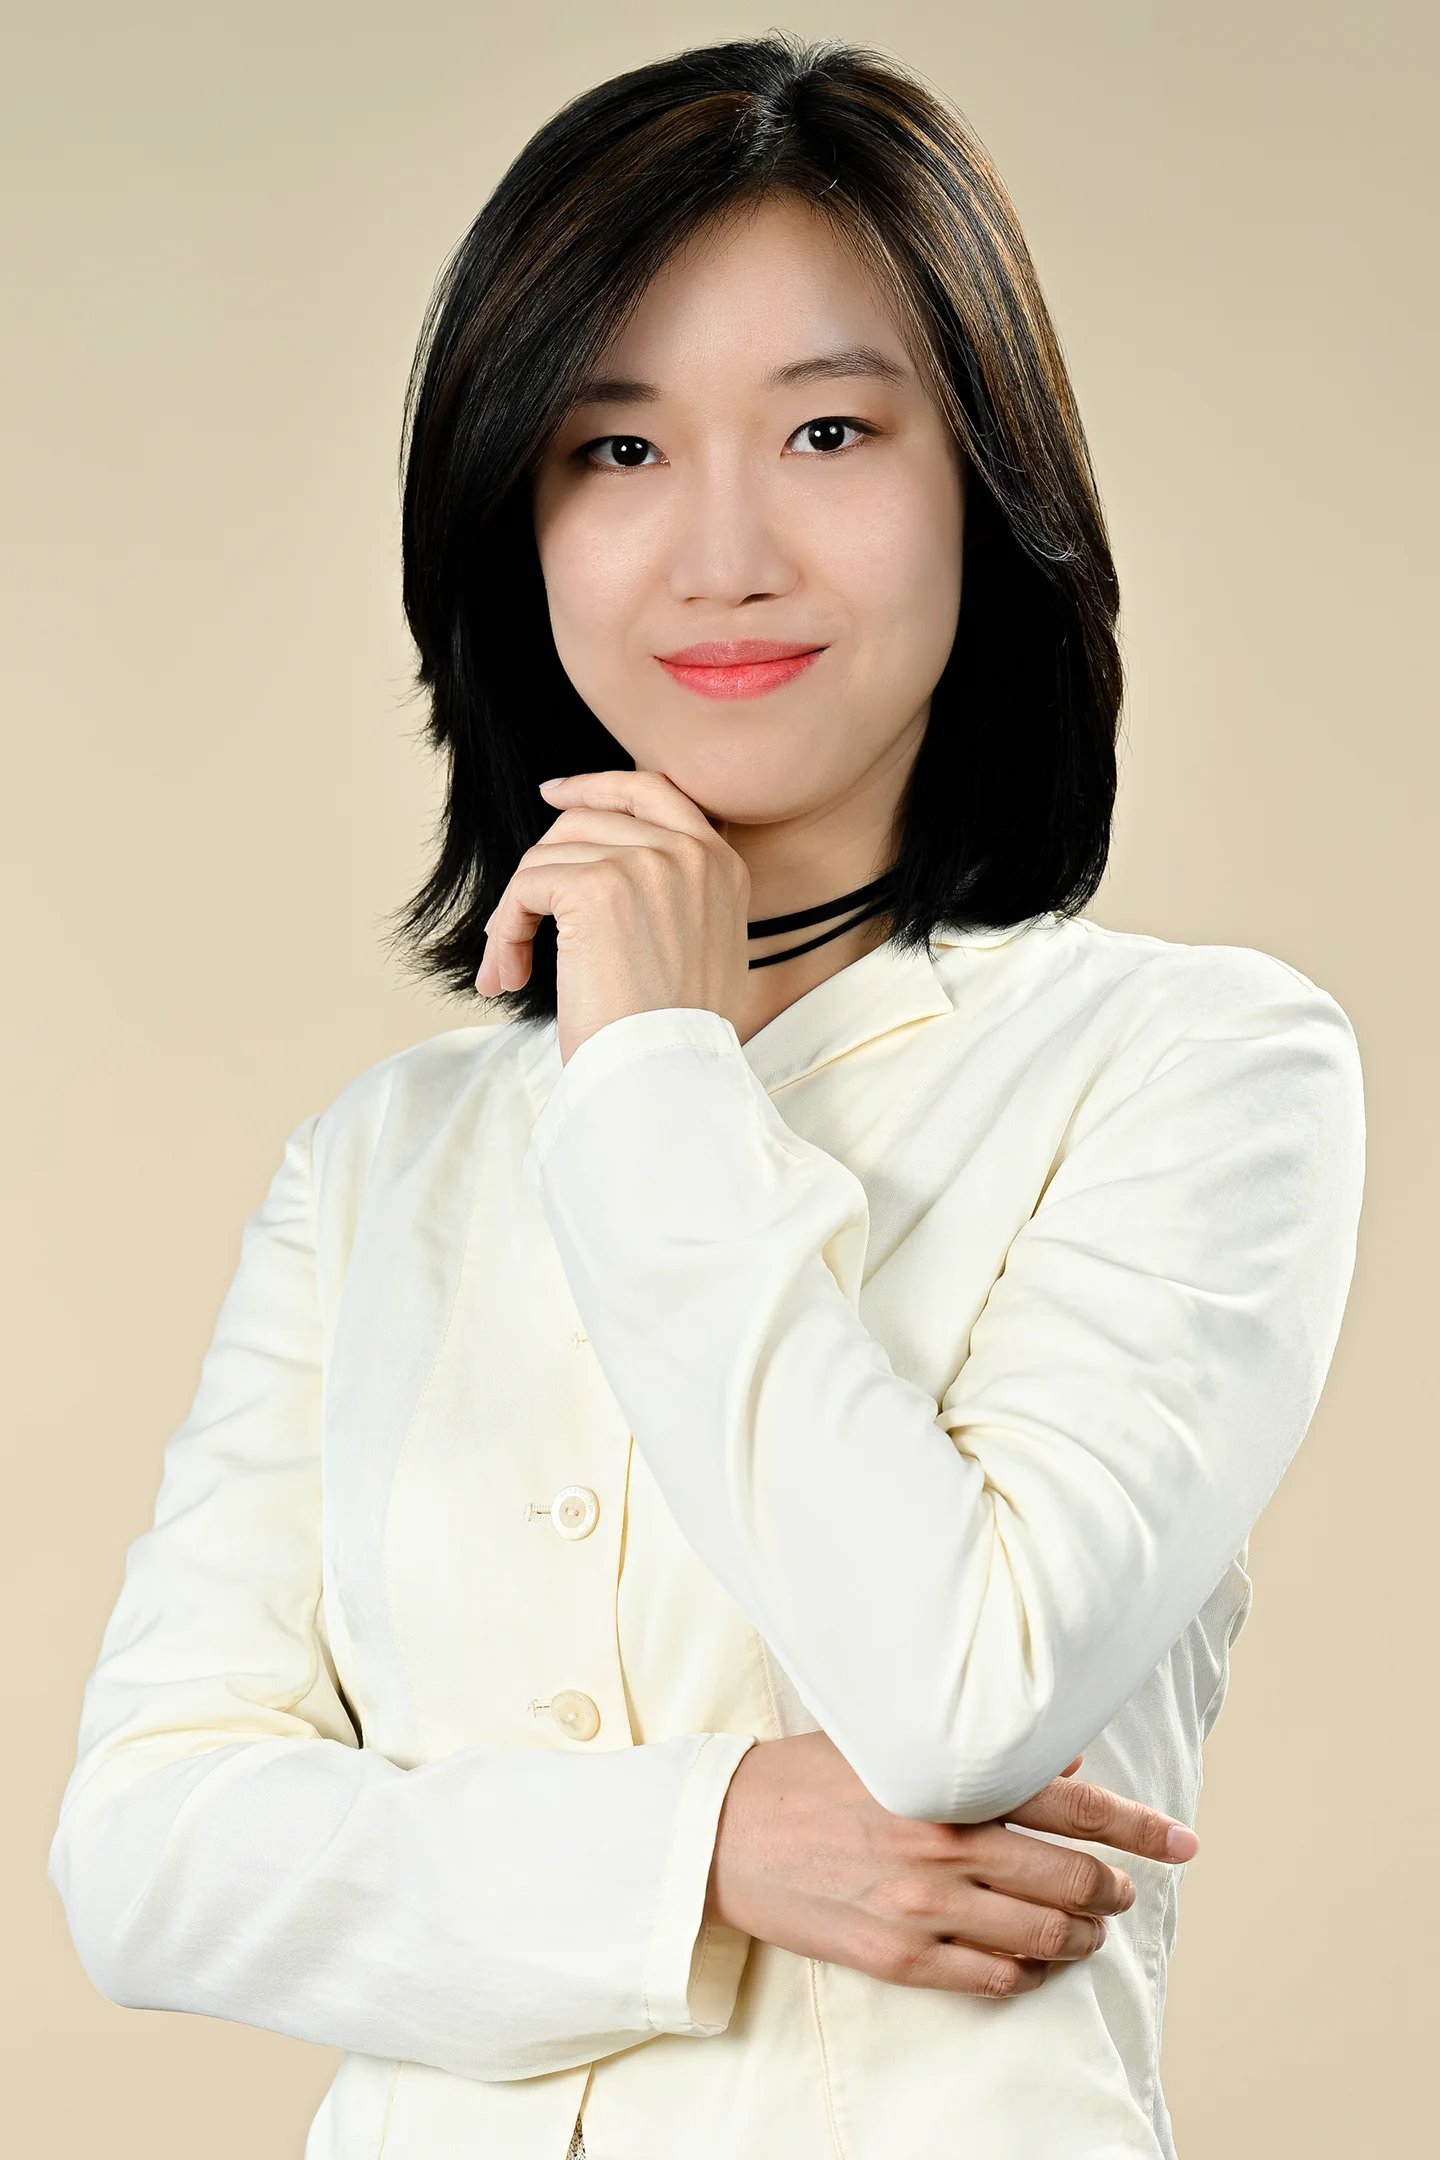 Corporate portrait of woman wearing a white blazer in the studio against a cream backdrop